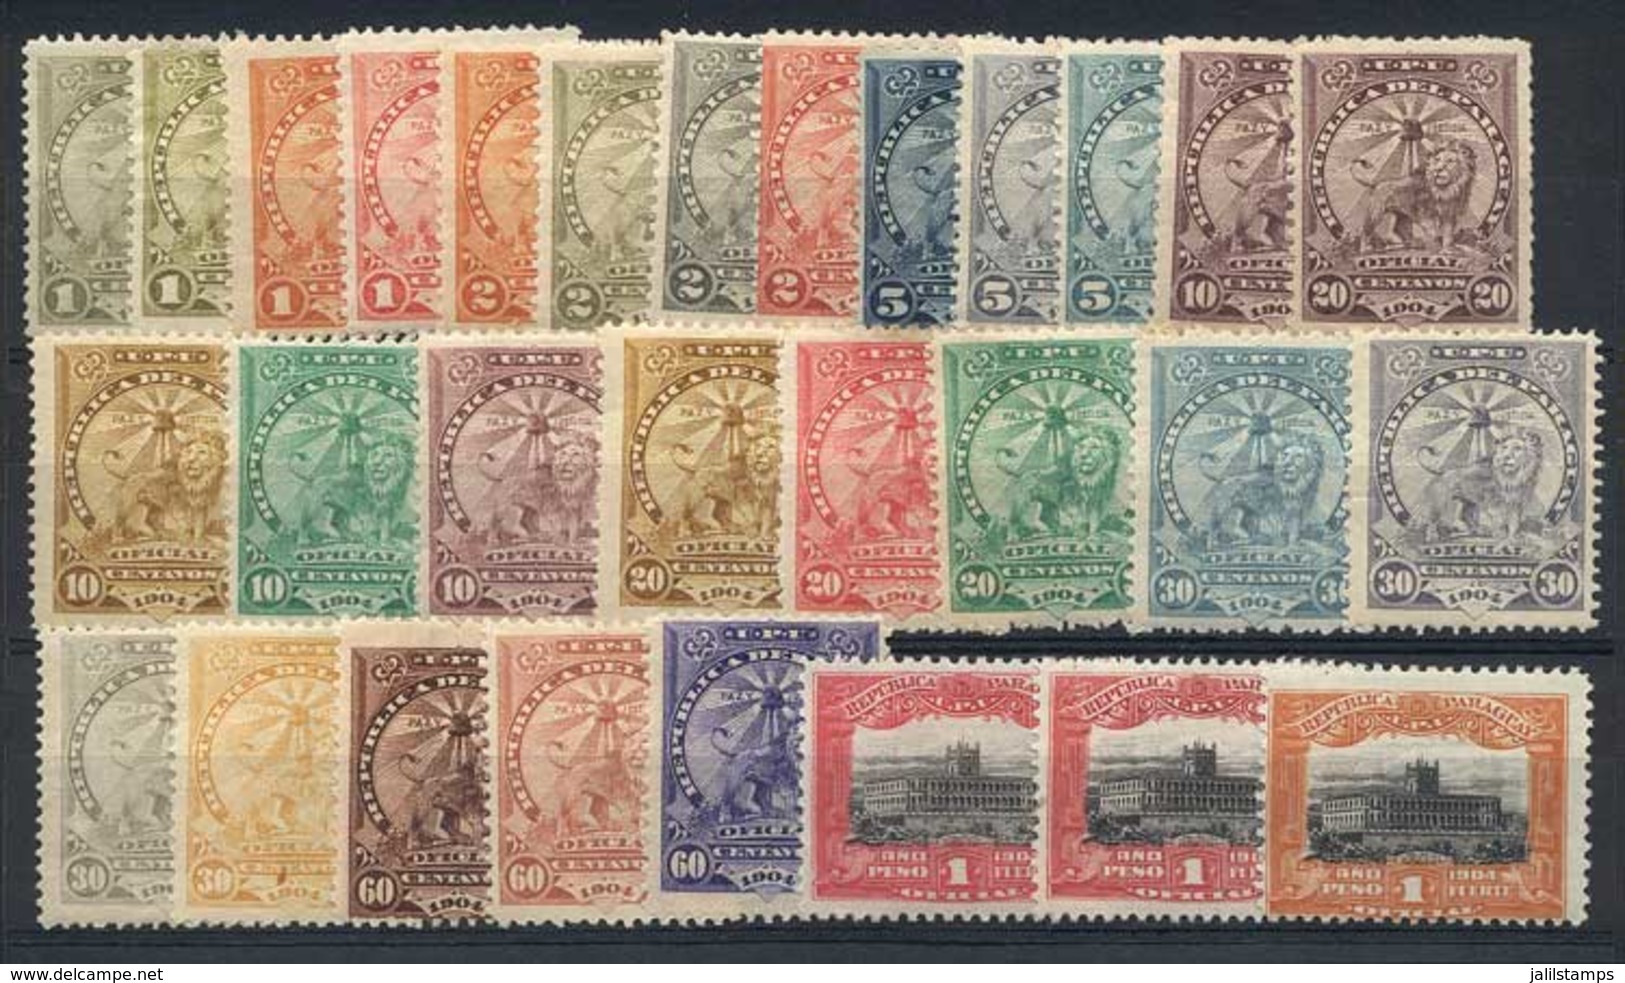 PARAGUAY: Sc.O57/O84, 1905/8, Complete Set, Mint Lightly Hinged, VF Quality, Rare! - Paraguay